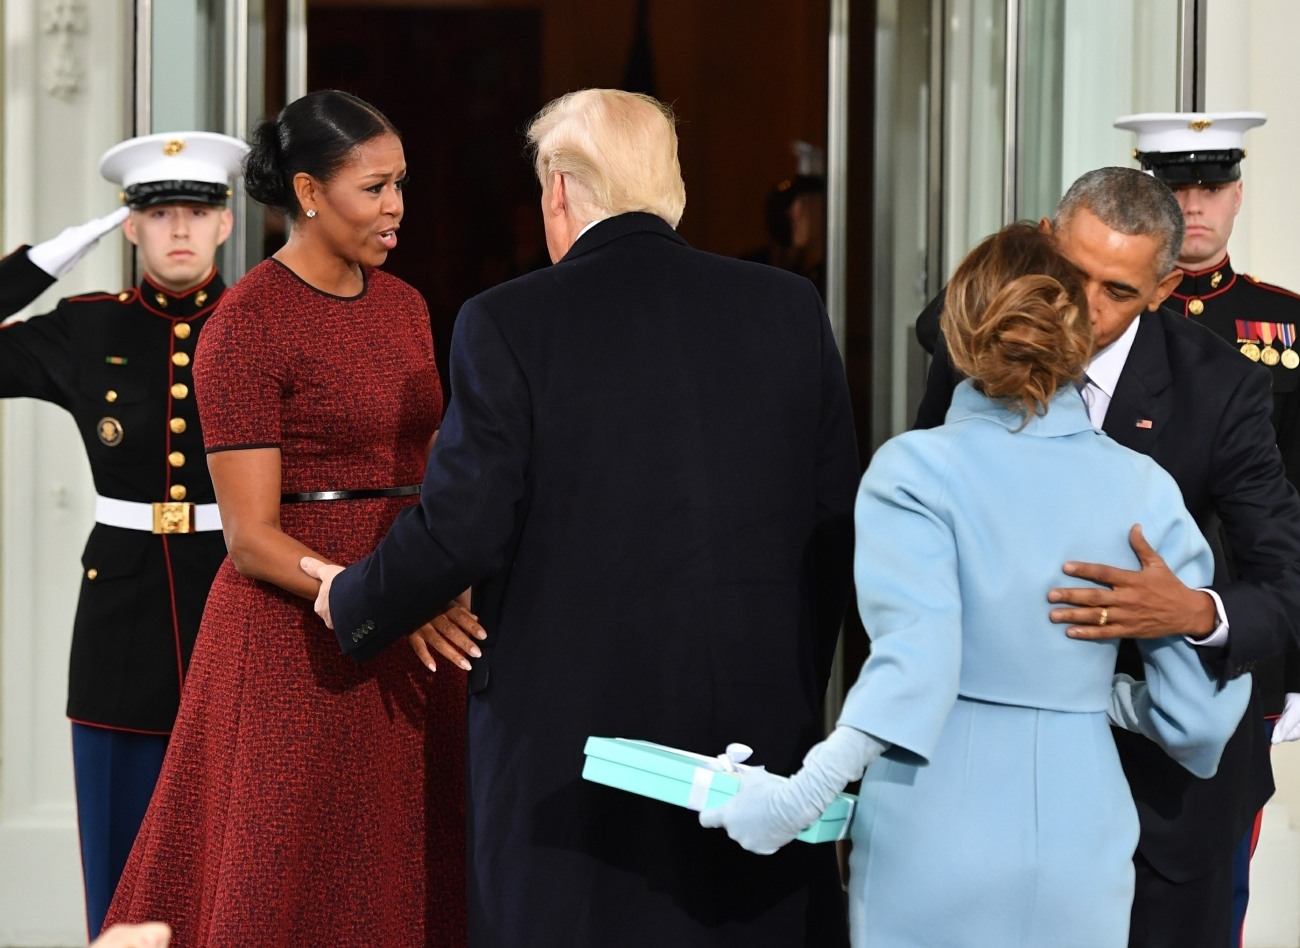 Barack Obama and Donald Trump arrive for the inauguration of President-elect Donald Trump